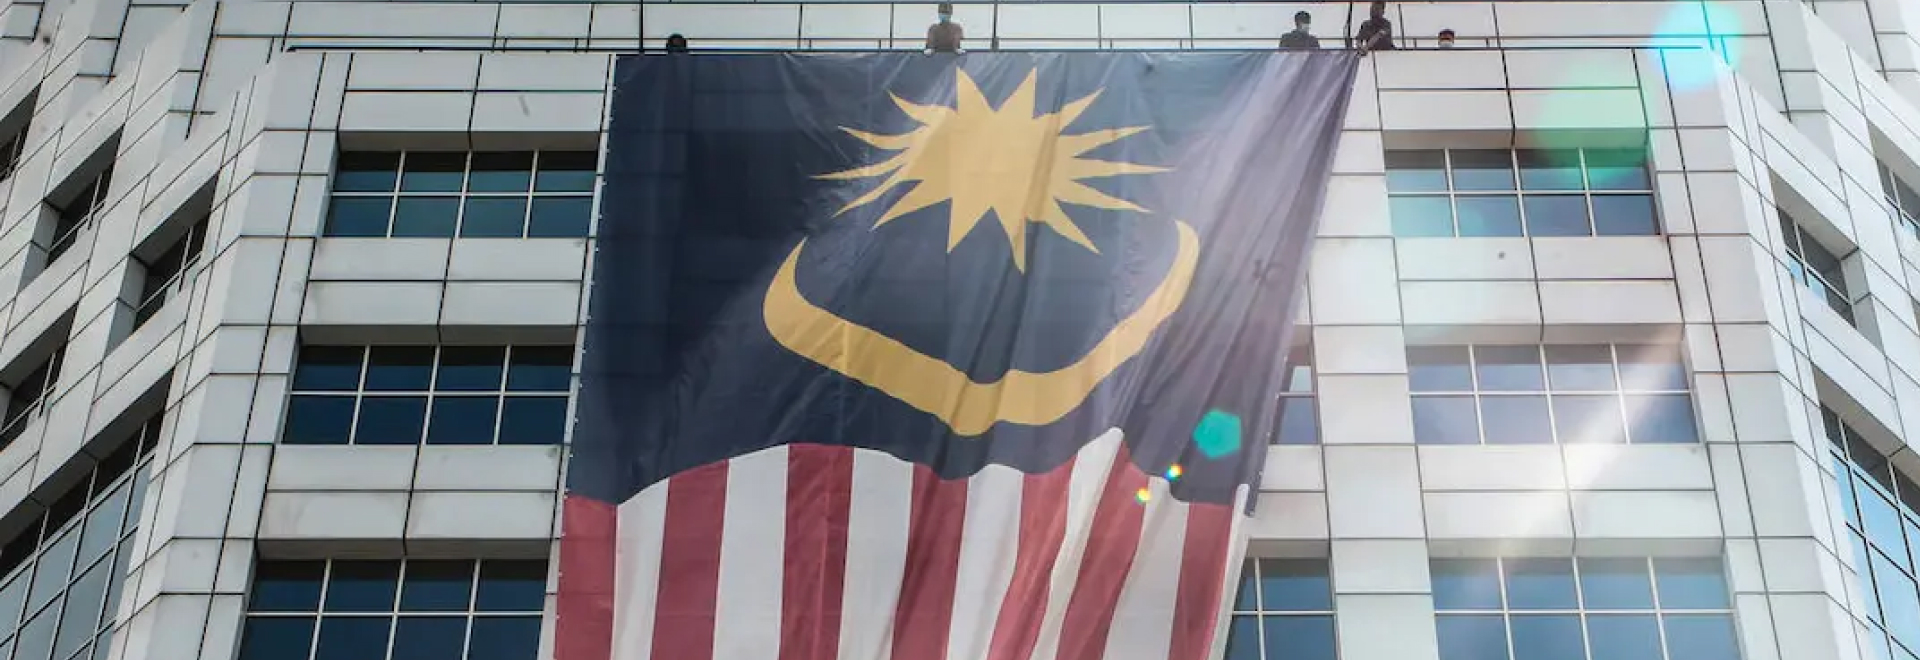 malaysia flag hanging outside a building